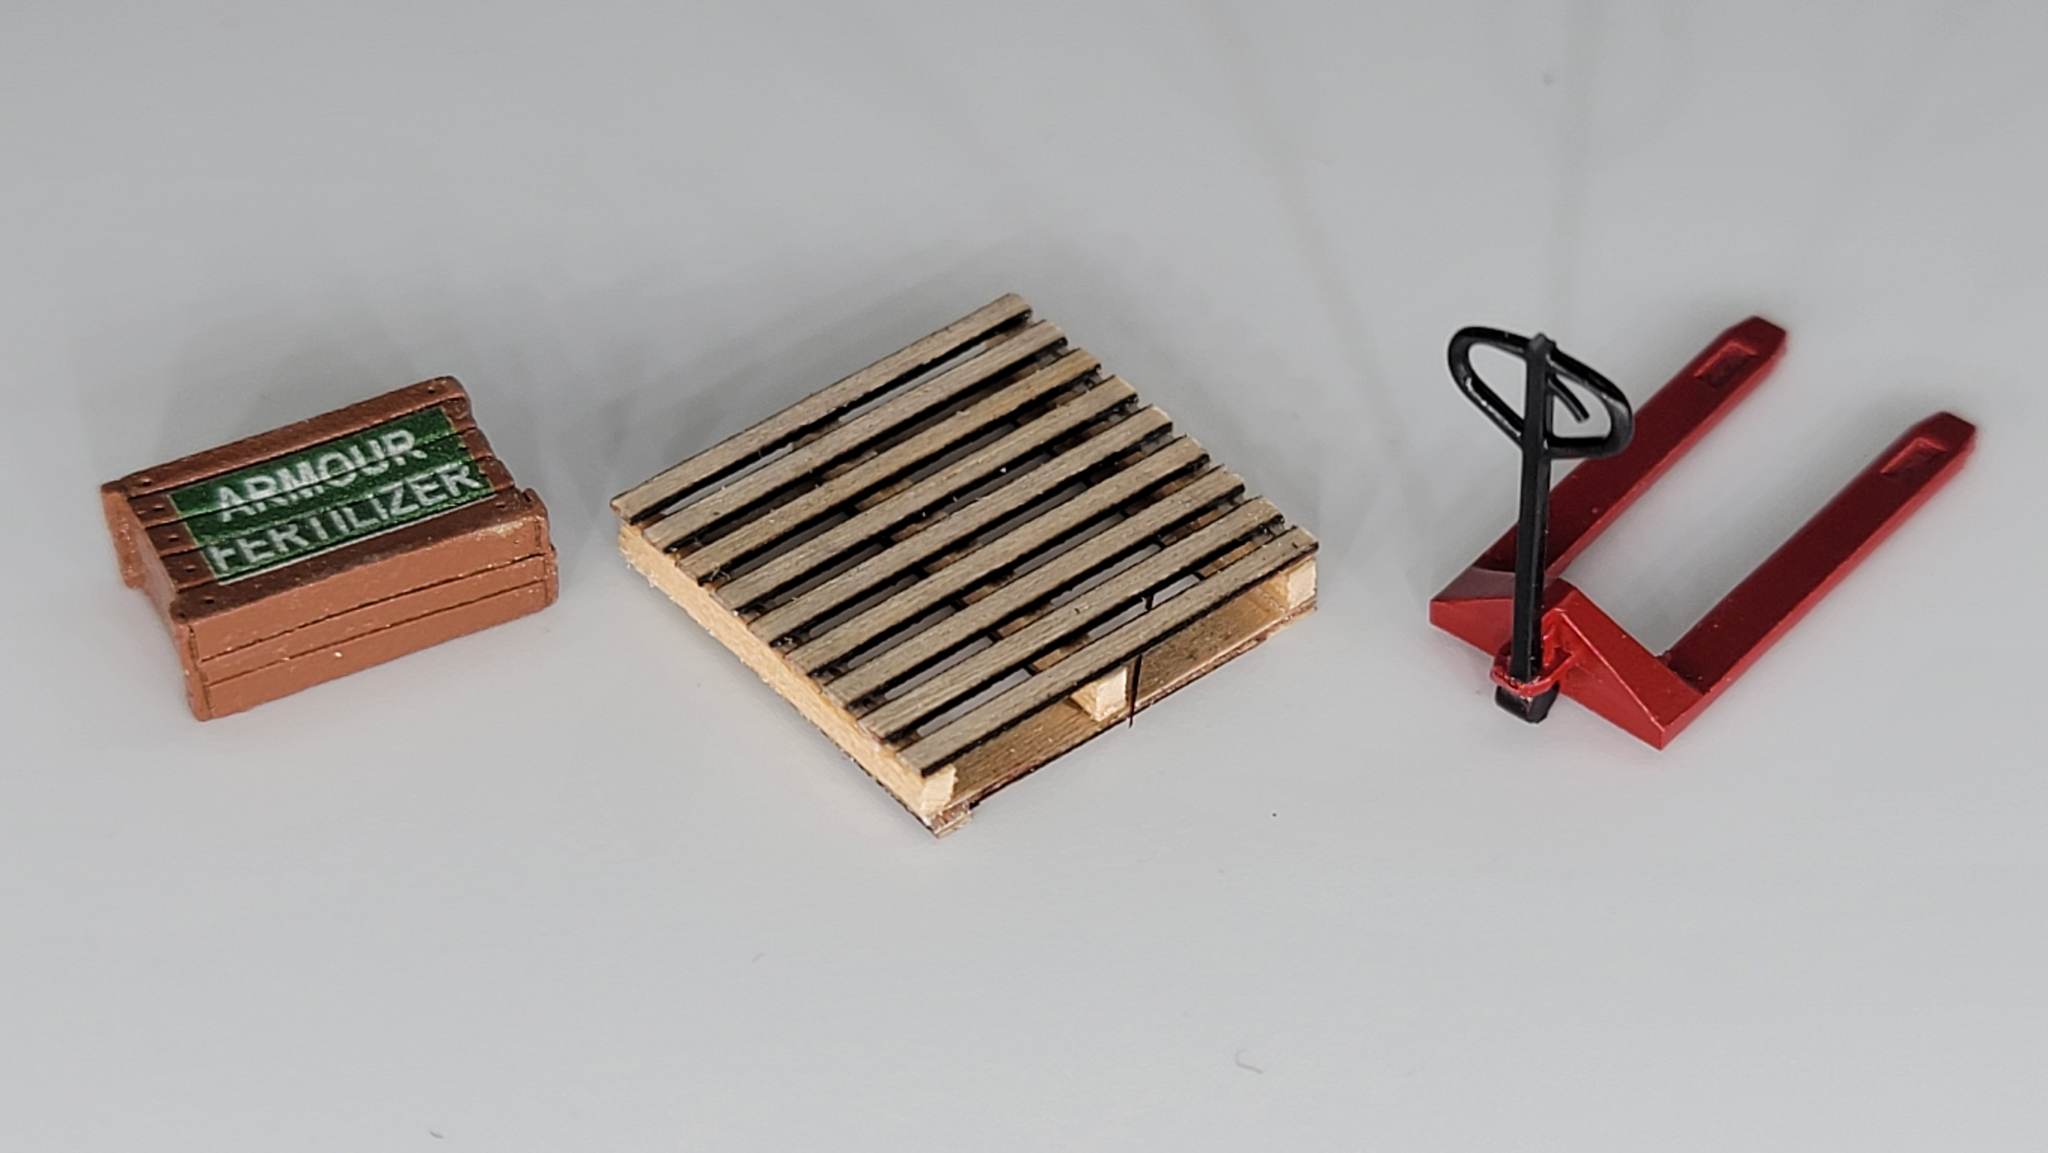 Pallet Jack, Pallet and Crate (S Scale)